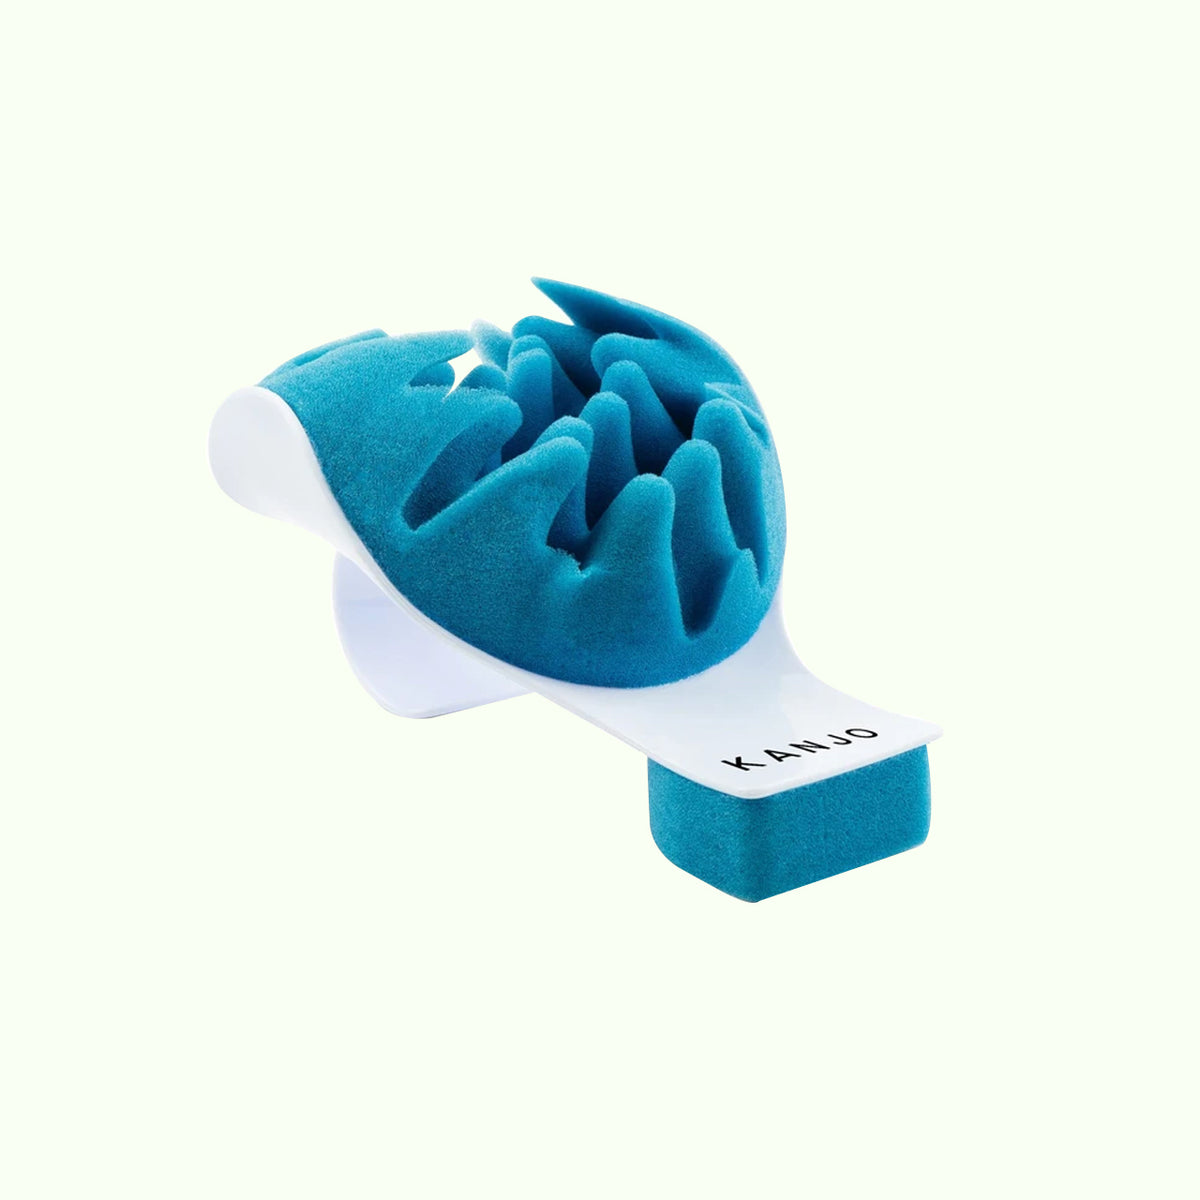 Kanjo Acupressure Neck Pain Relief Cushion, Cervical Traction Device &  Acupressure Cushion for Muscle Tension & Relaxation, Helps Relieve Neck &  Shoulder Pain, FSA & HSA Eligible